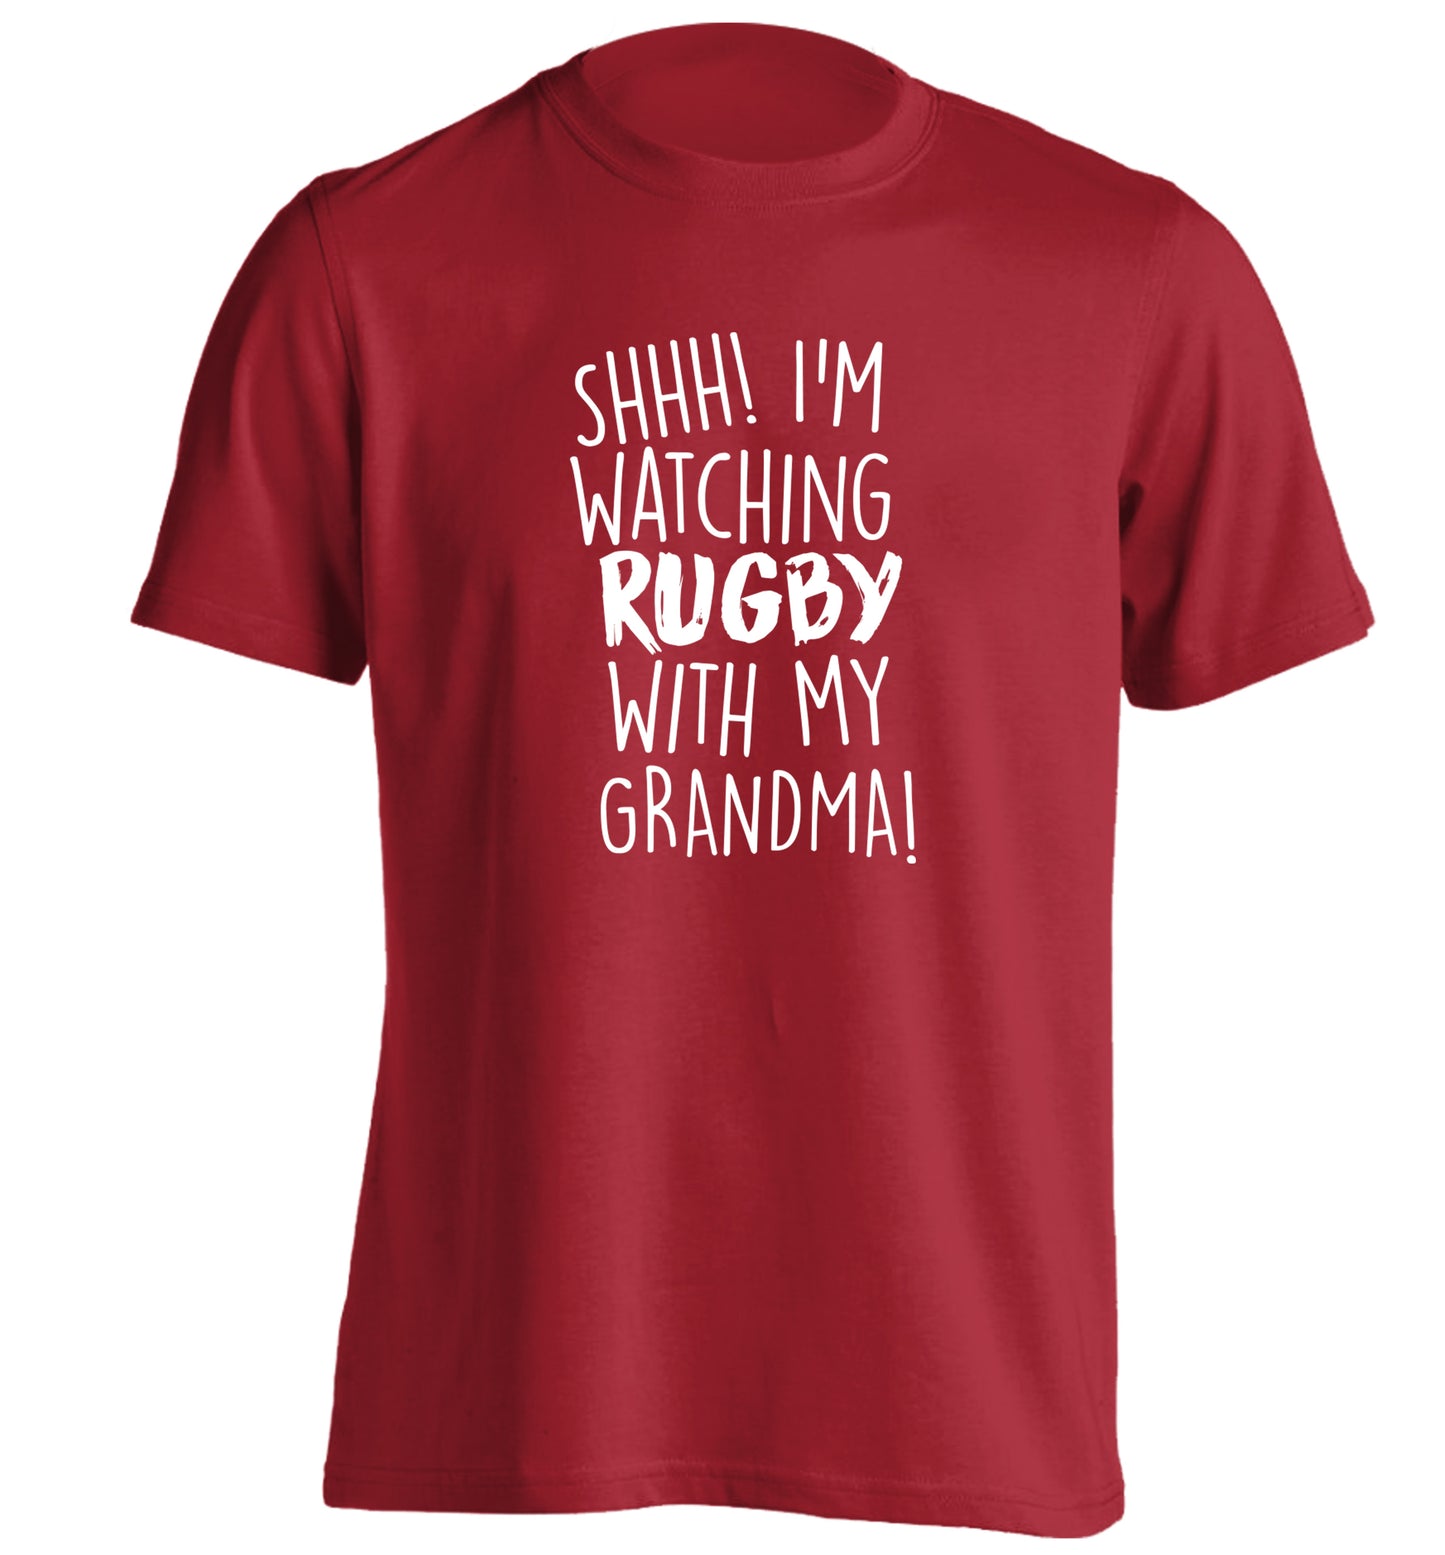 Shh I'm watching rugby with my grandma adults unisex red Tshirt 2XL